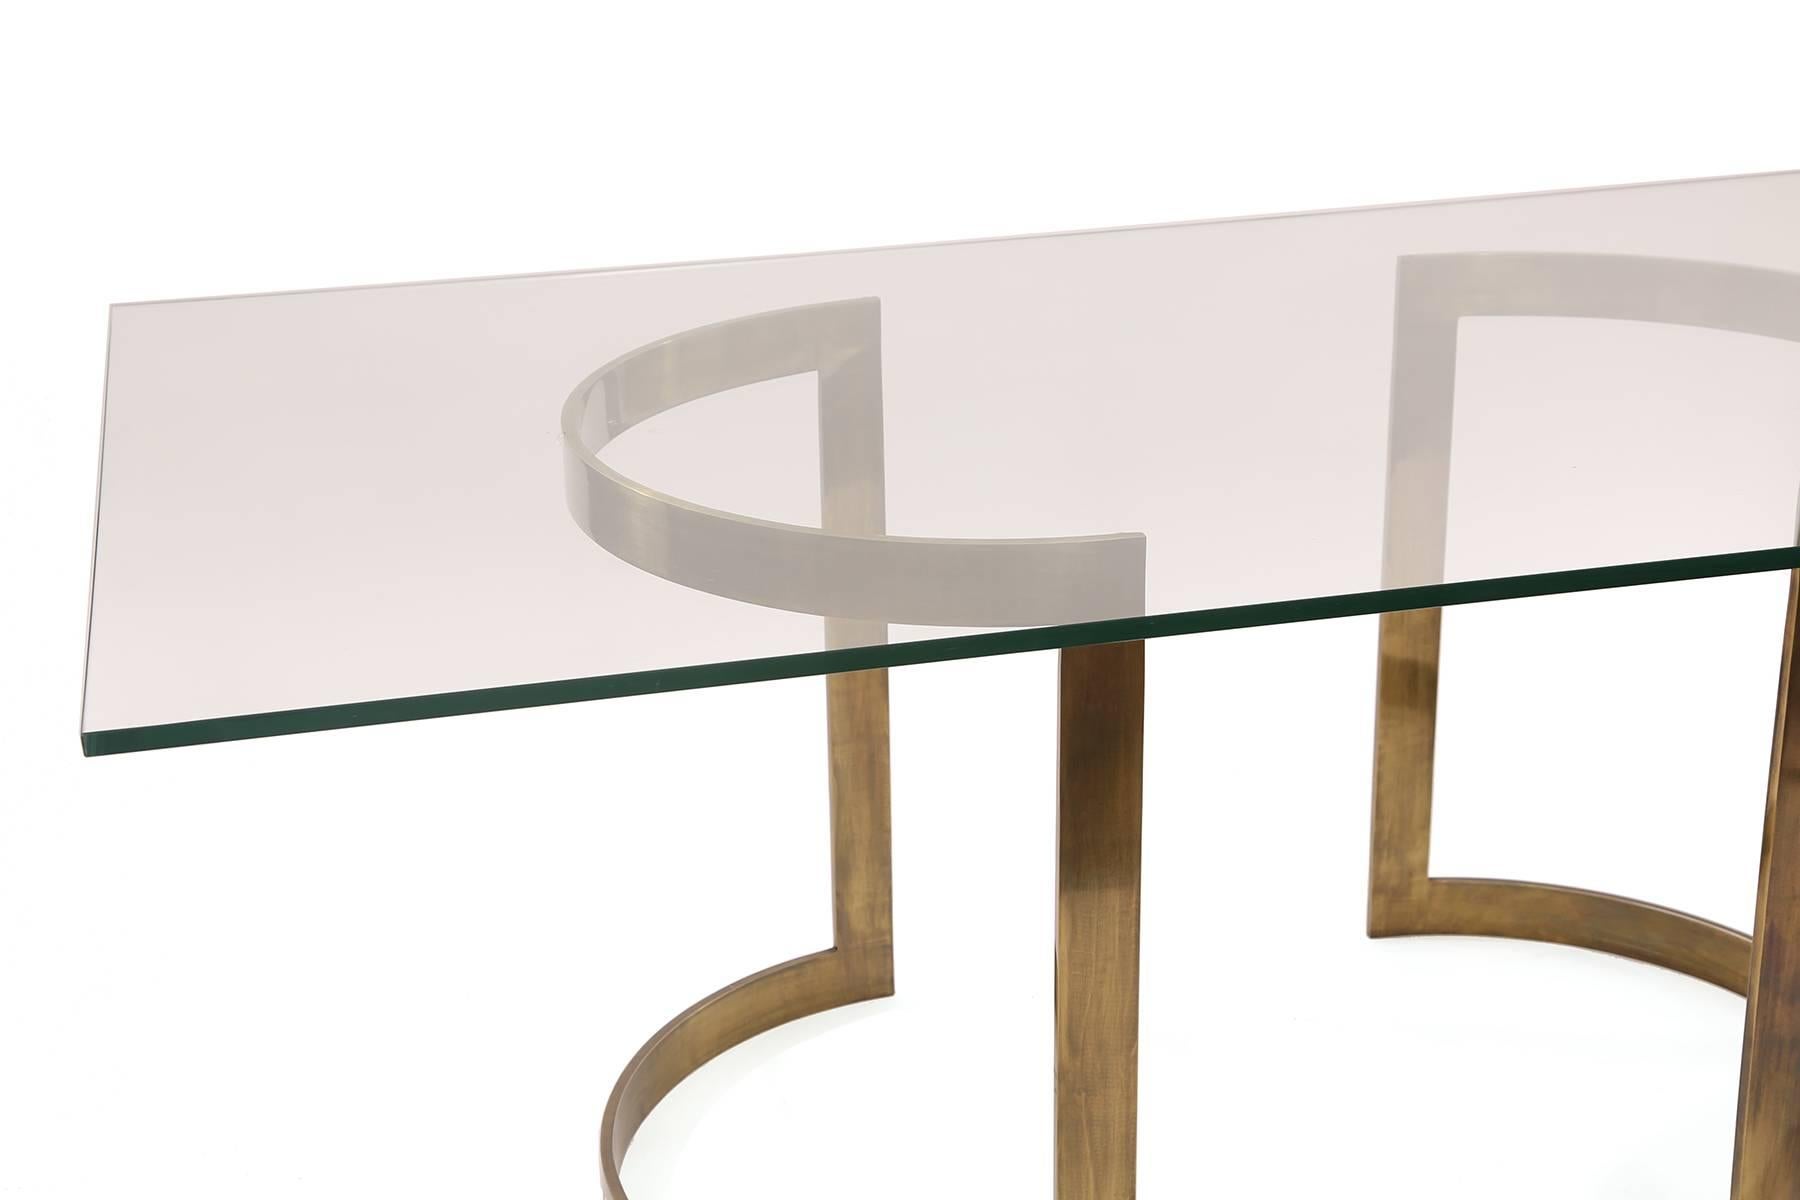 Milo Baughman for Thayer Coggin bronze dining table, circa early 1970s. This all original example has two beautifully formed oiled bronze bases. The glass in the photos is 6' long but can be larger or smaller if needed. Price listed is for the bases